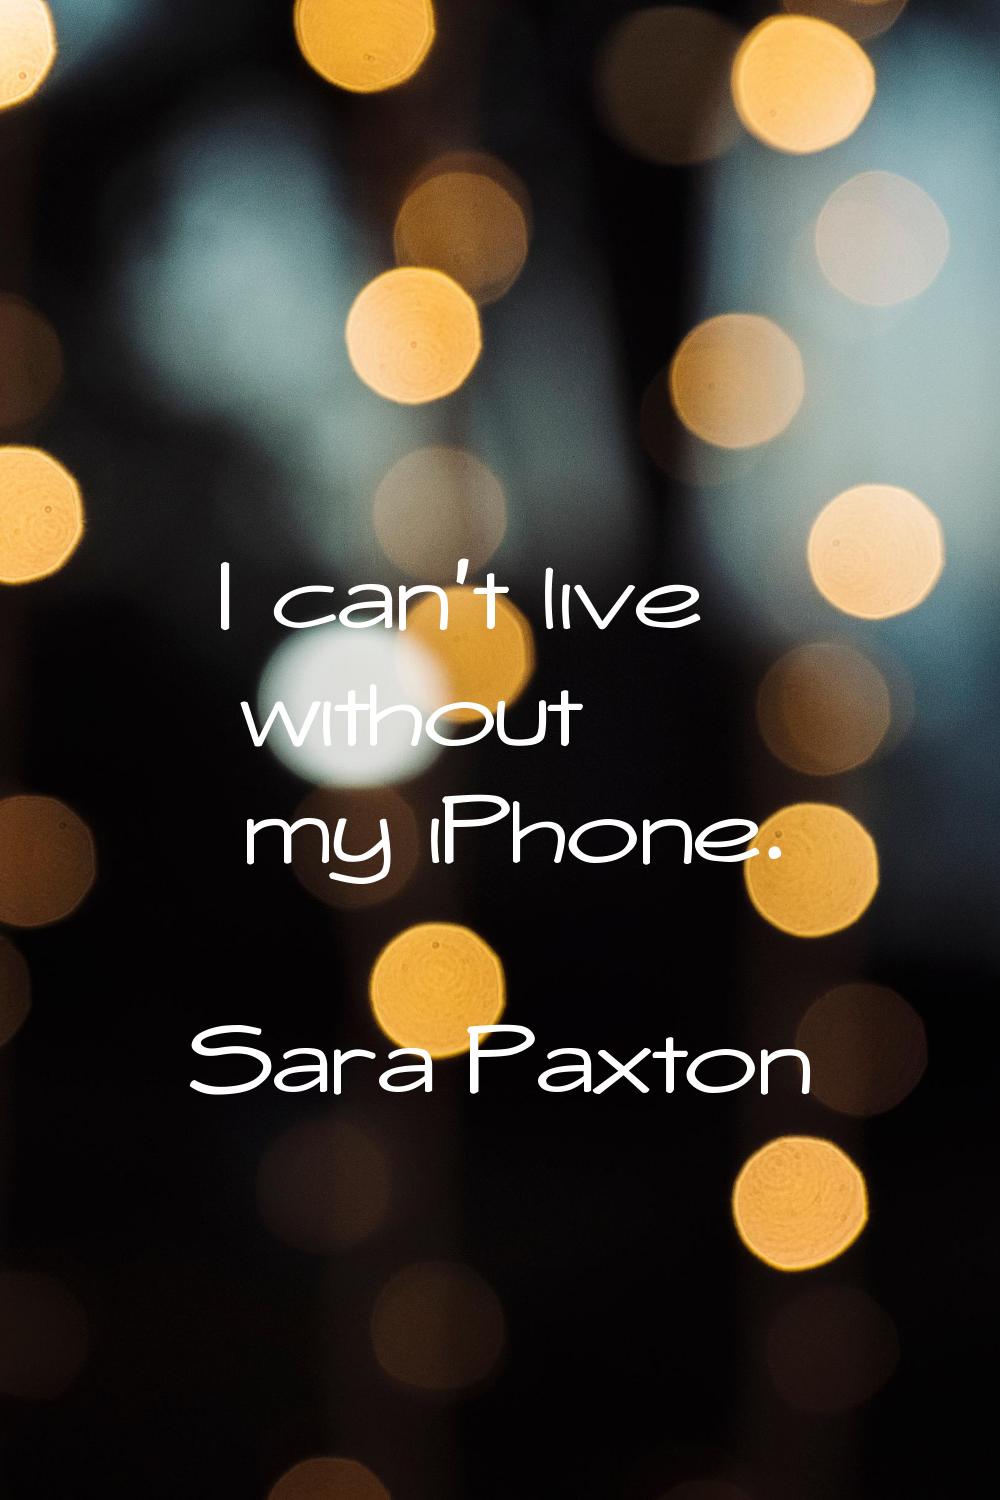 I can't live without my iPhone.